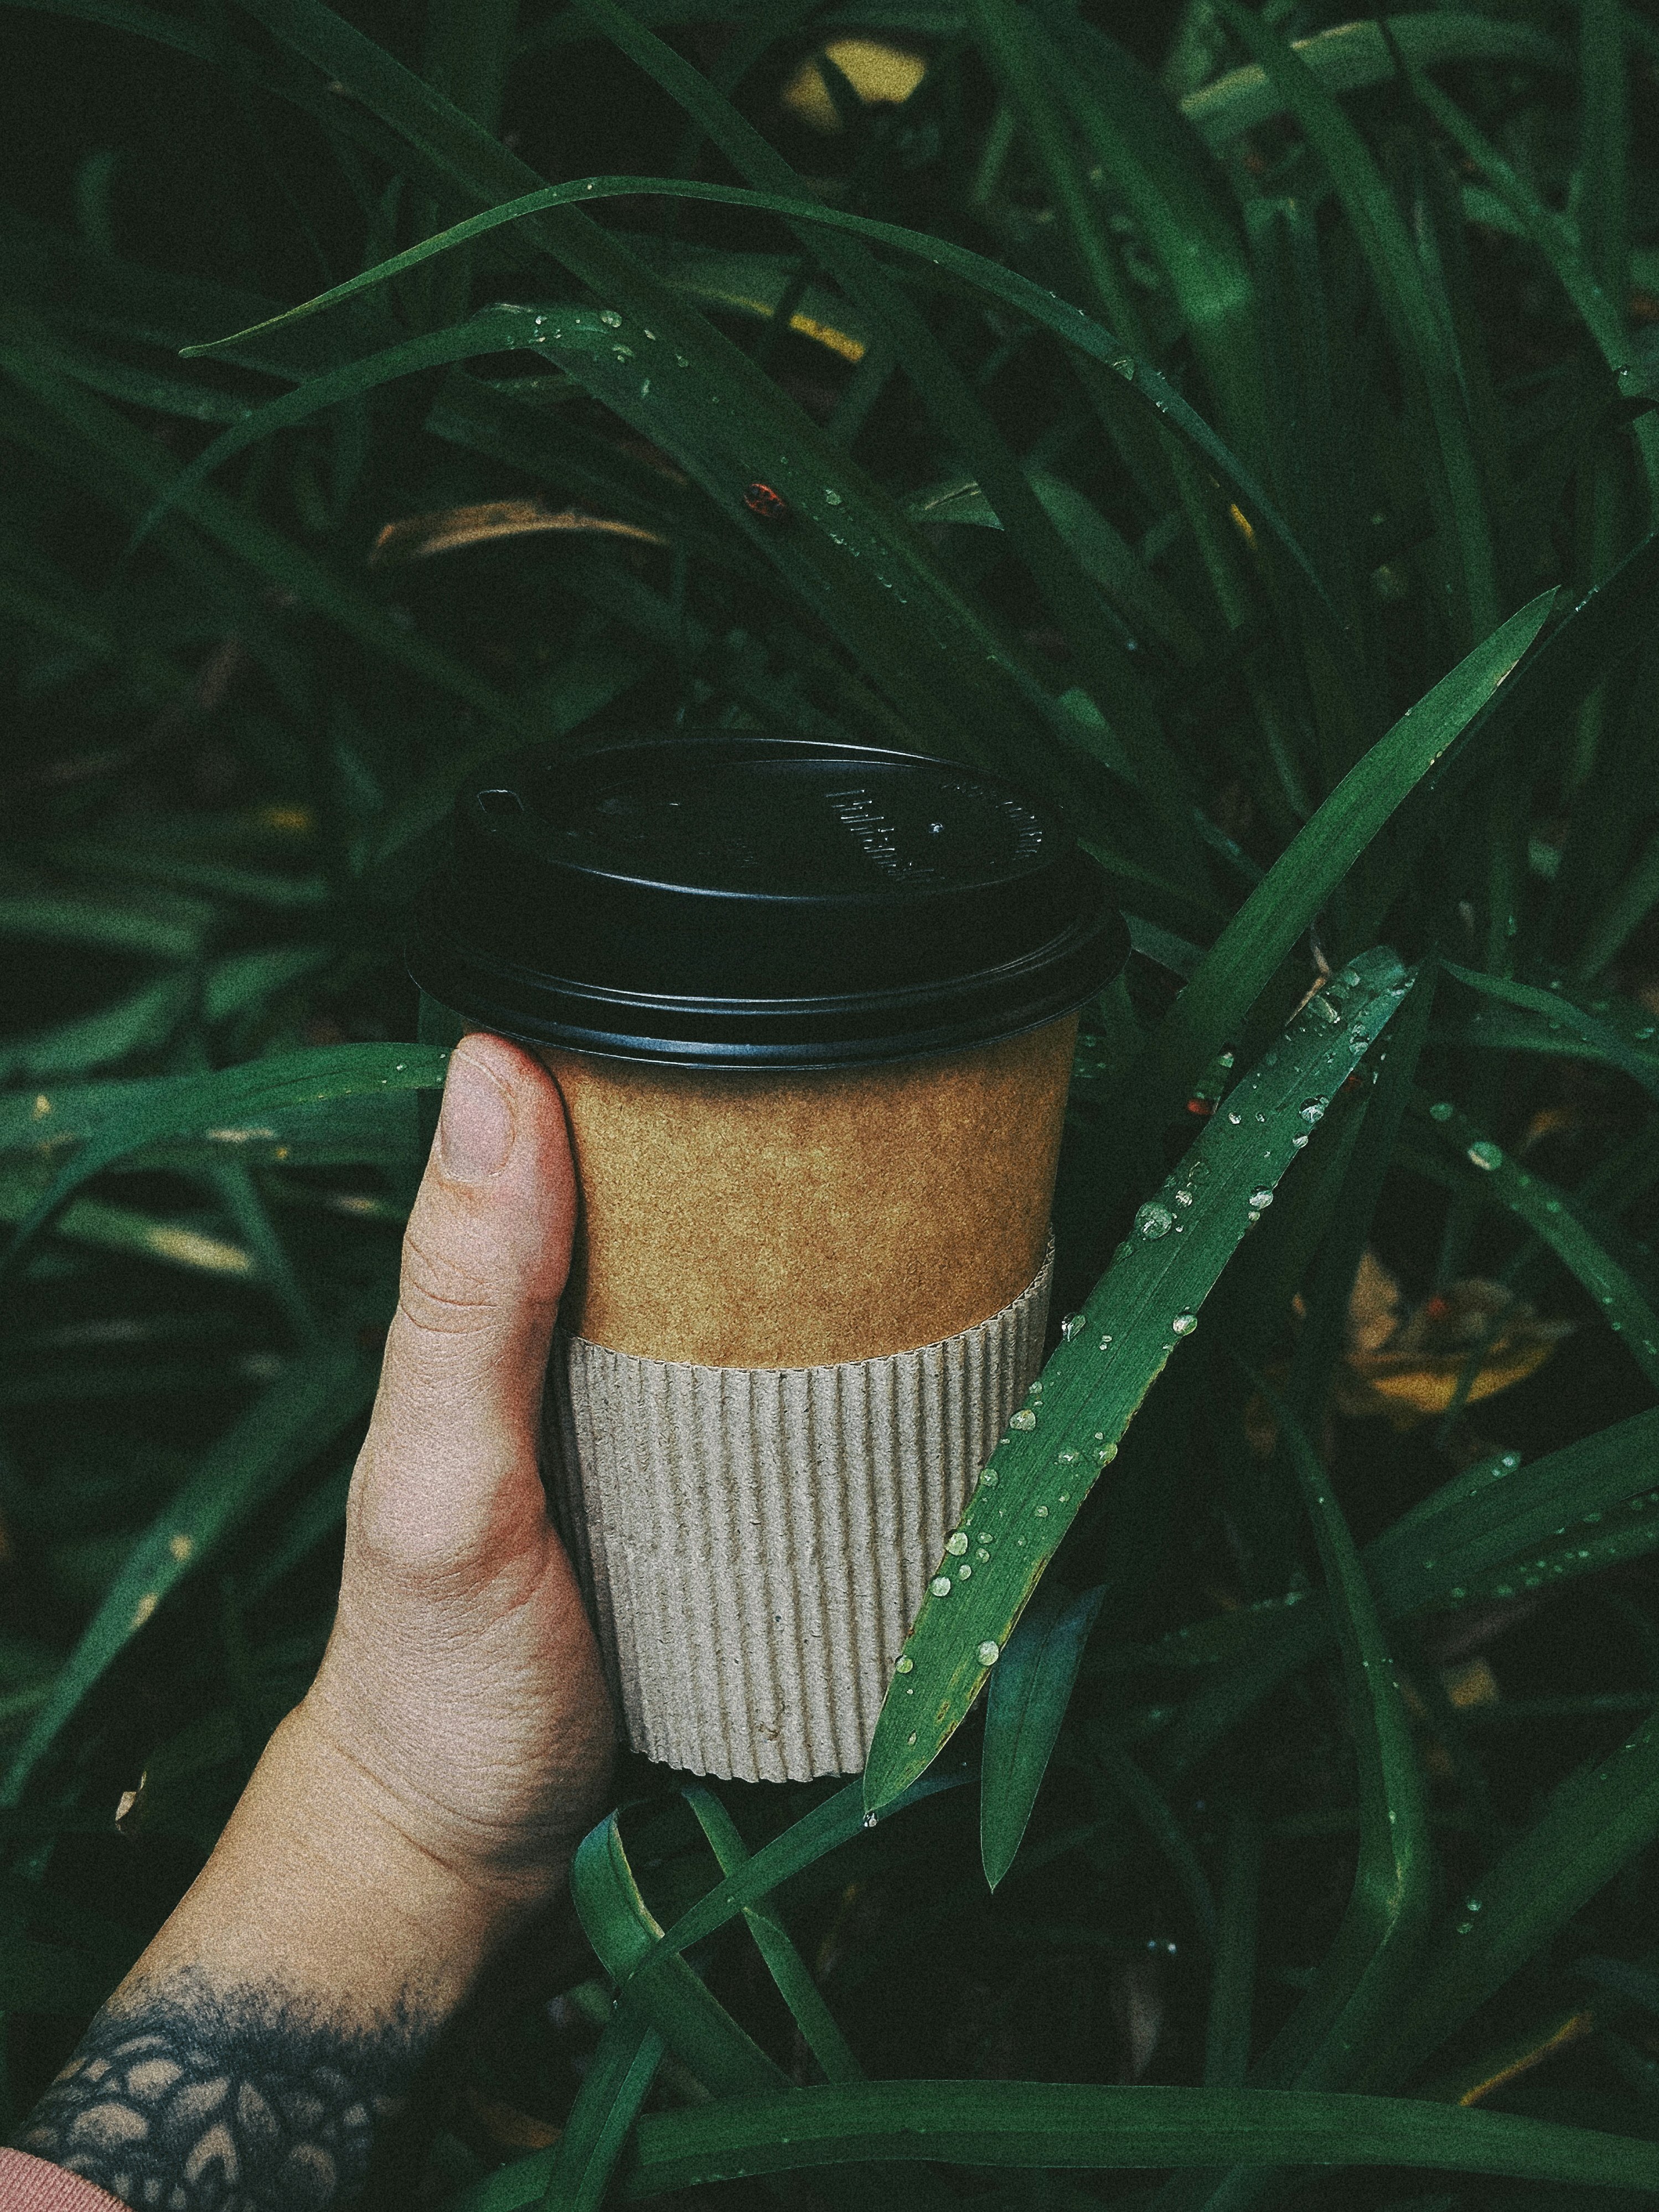 brown disposable cup